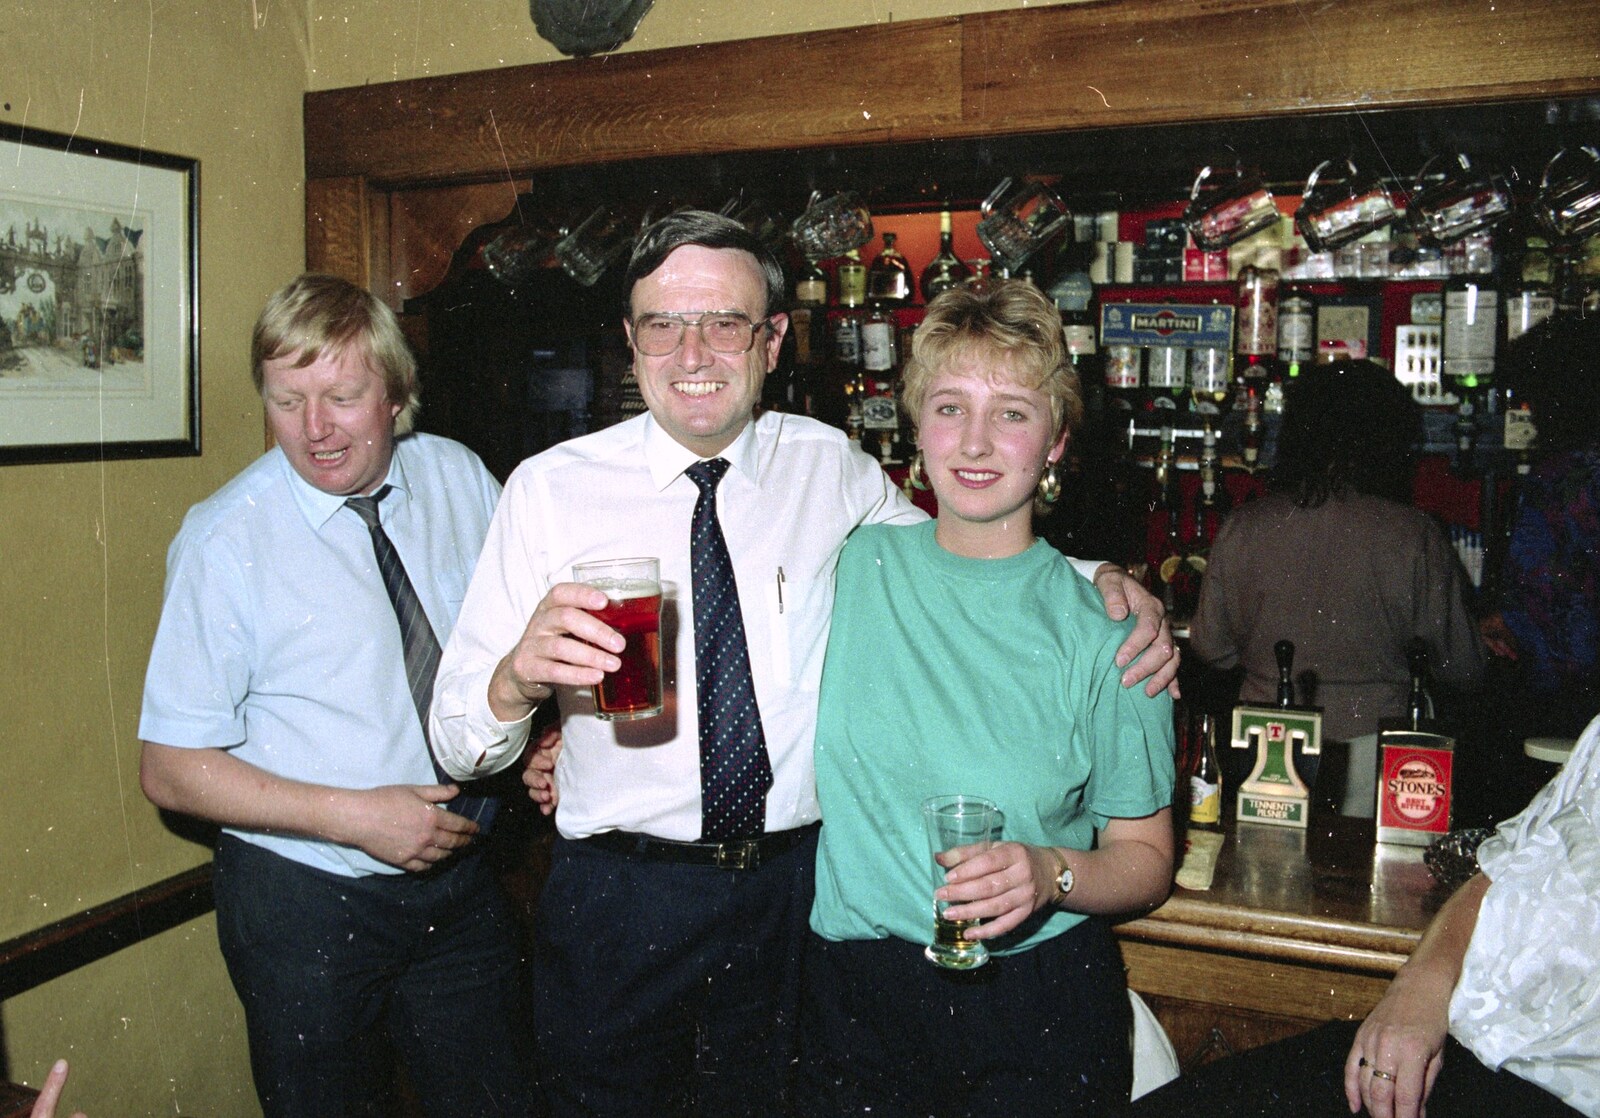 Alan, ? and Kate at the bar from Kite Flying, and an Introduction to BPCC Printec, Diss, Norfolk - 3rd August 1989